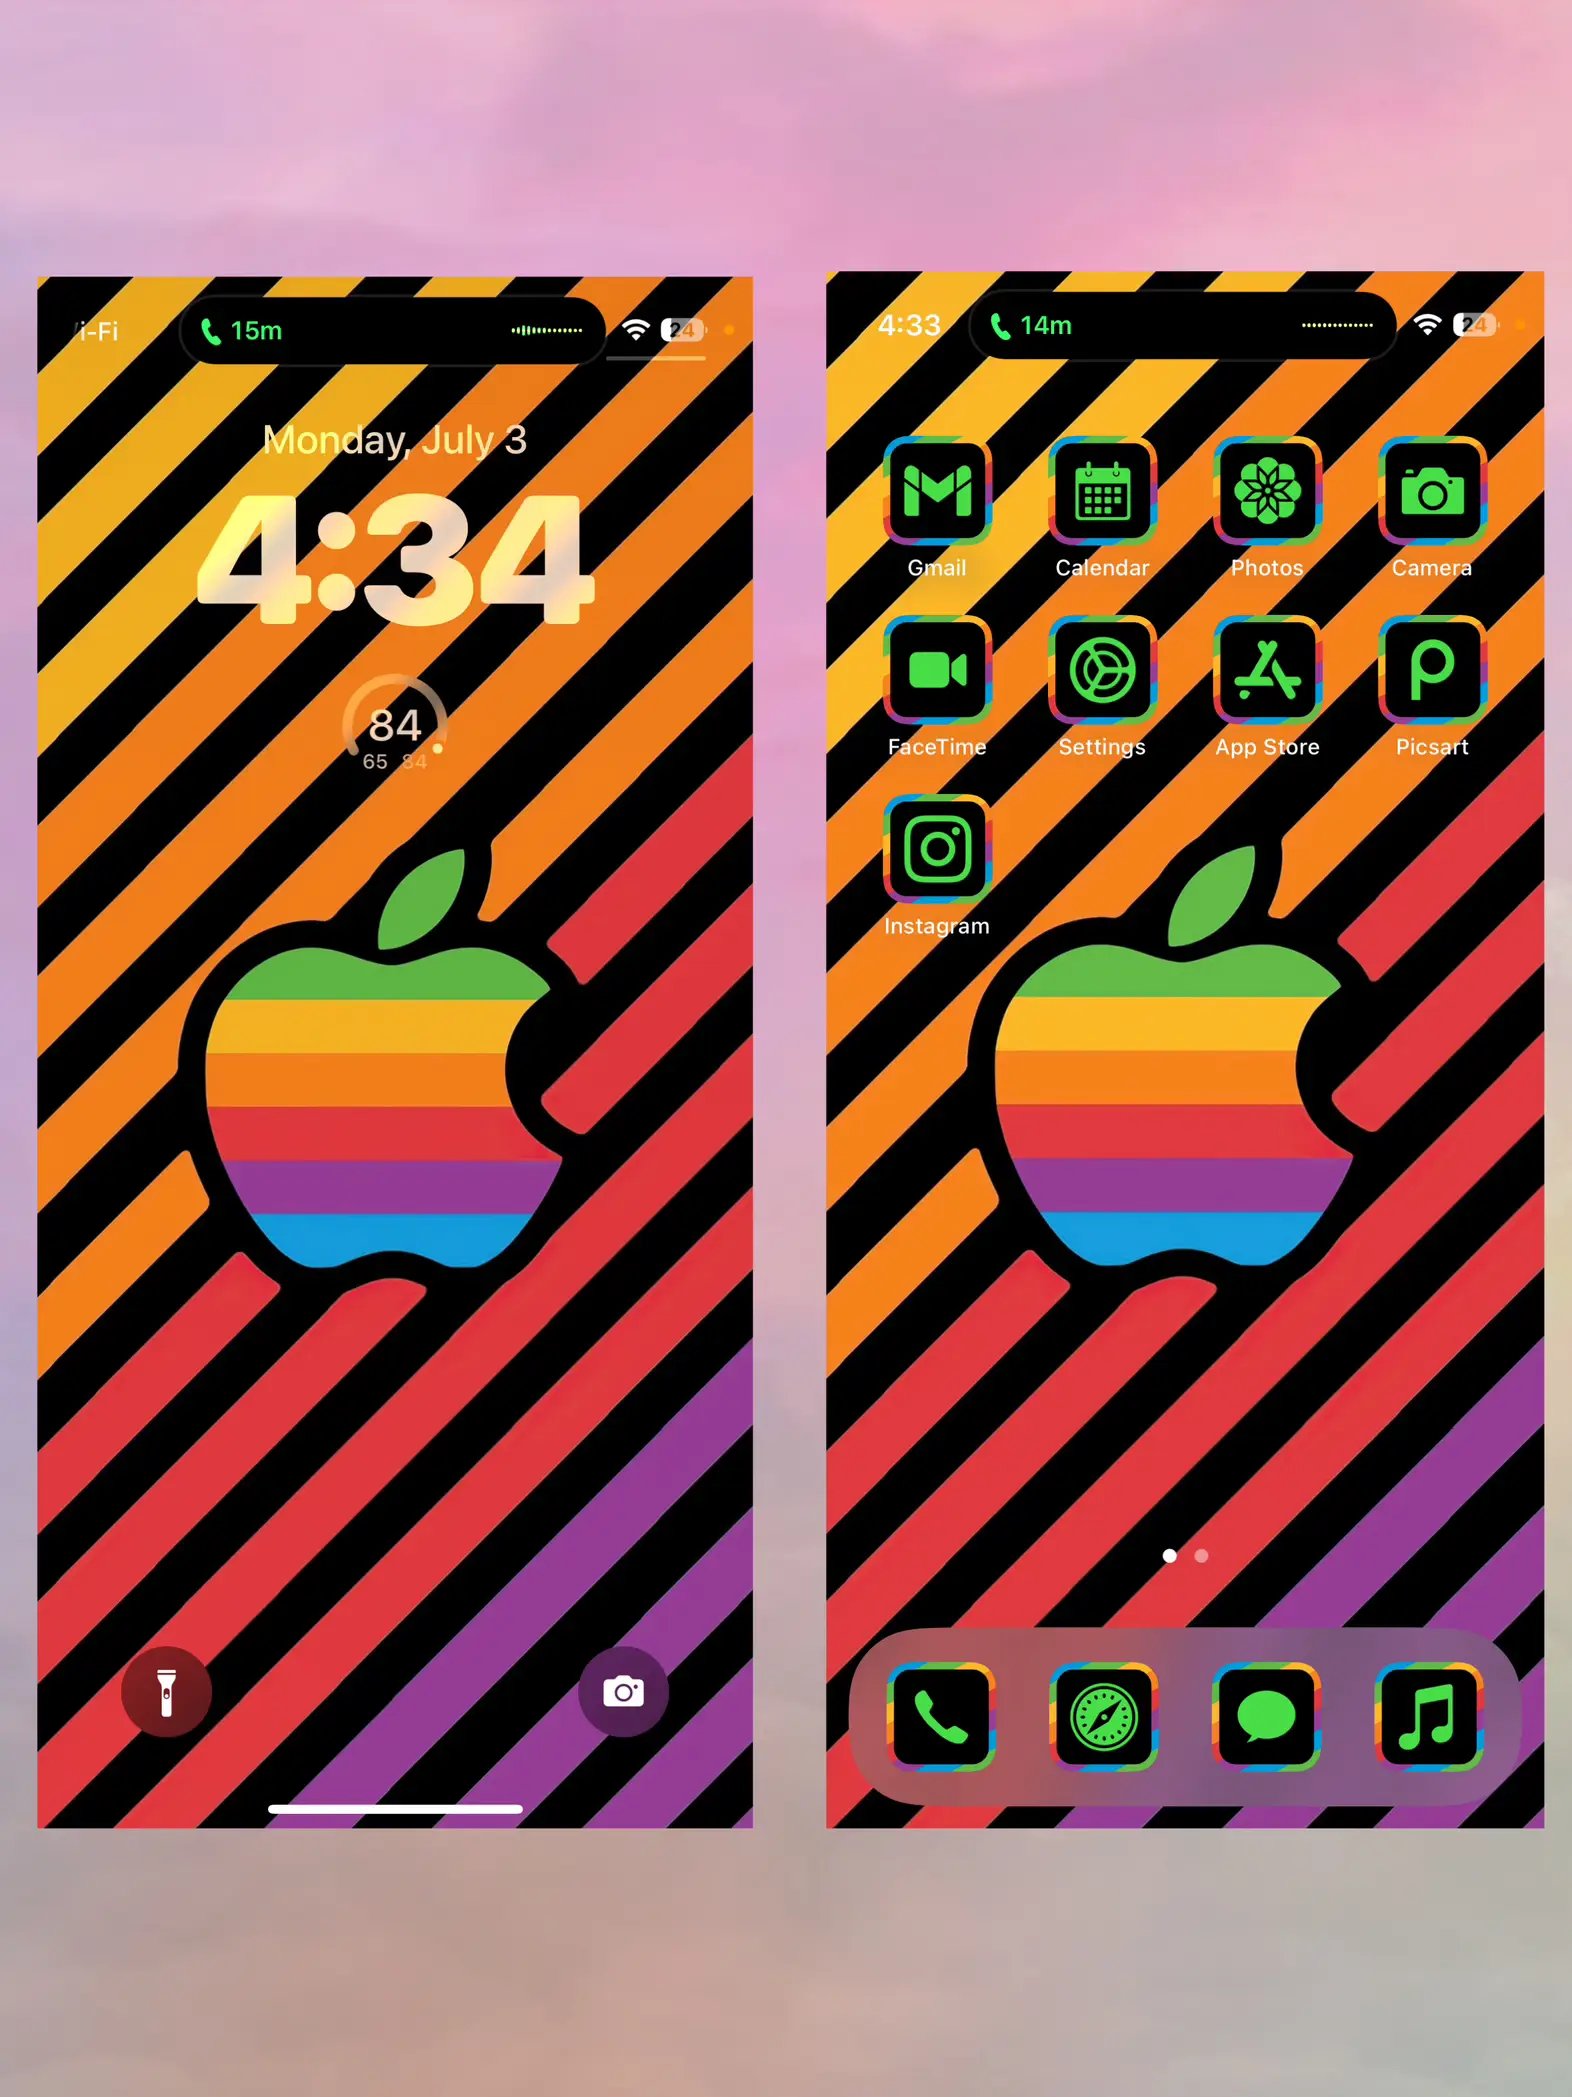 New Wallpaper & Icons🍎🌈, Gallery posted by Vic ✌🏼